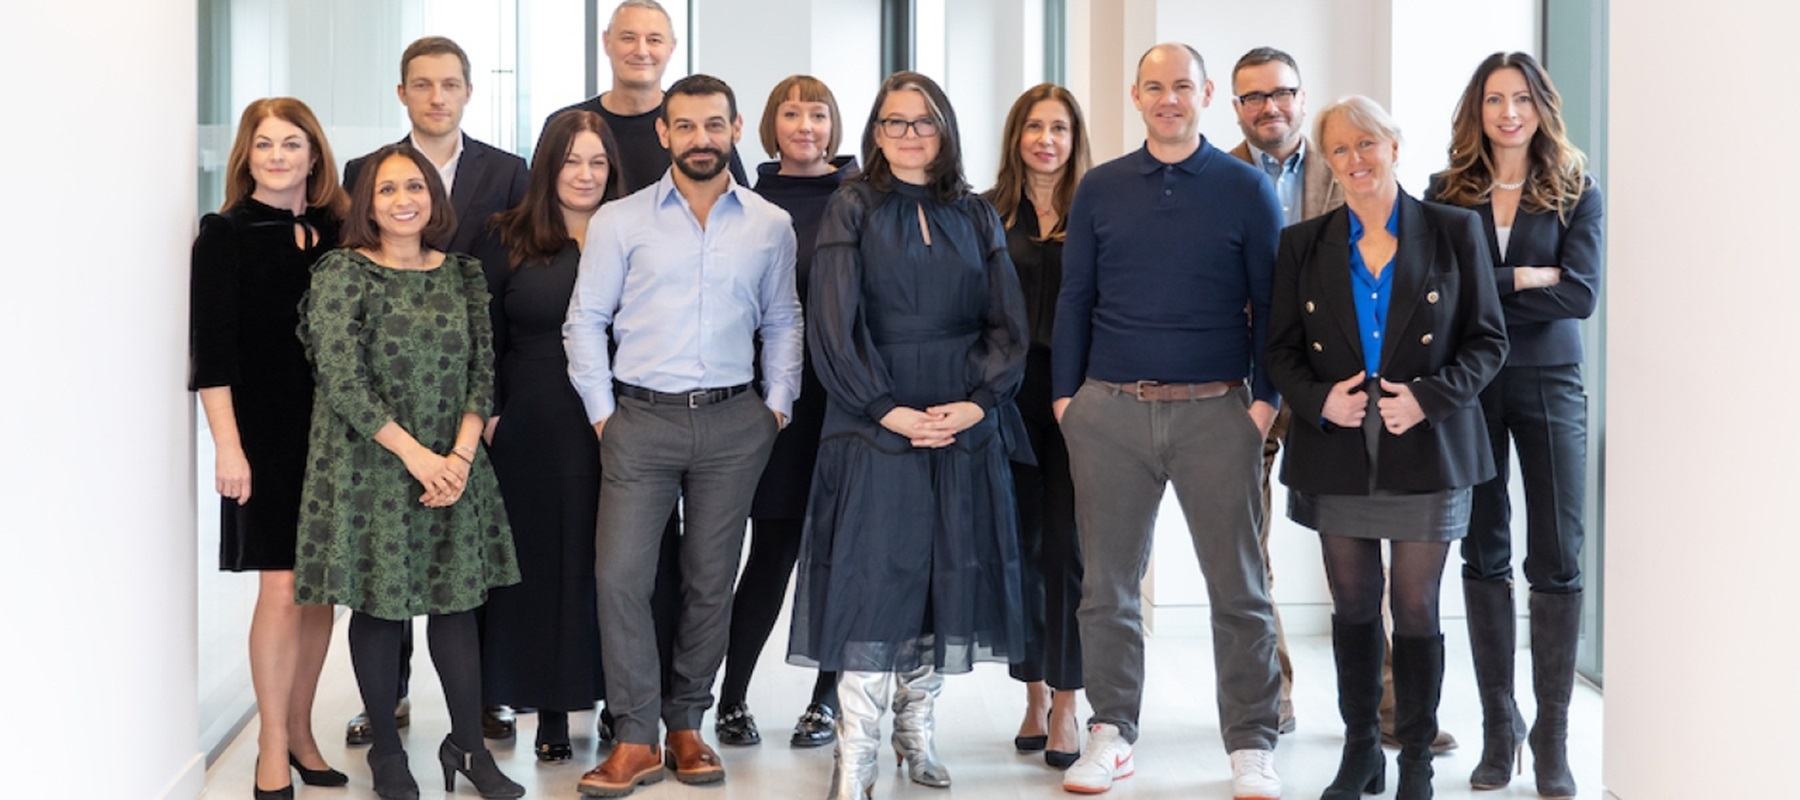 Hearst UK announces new leadership team and key senior appointments